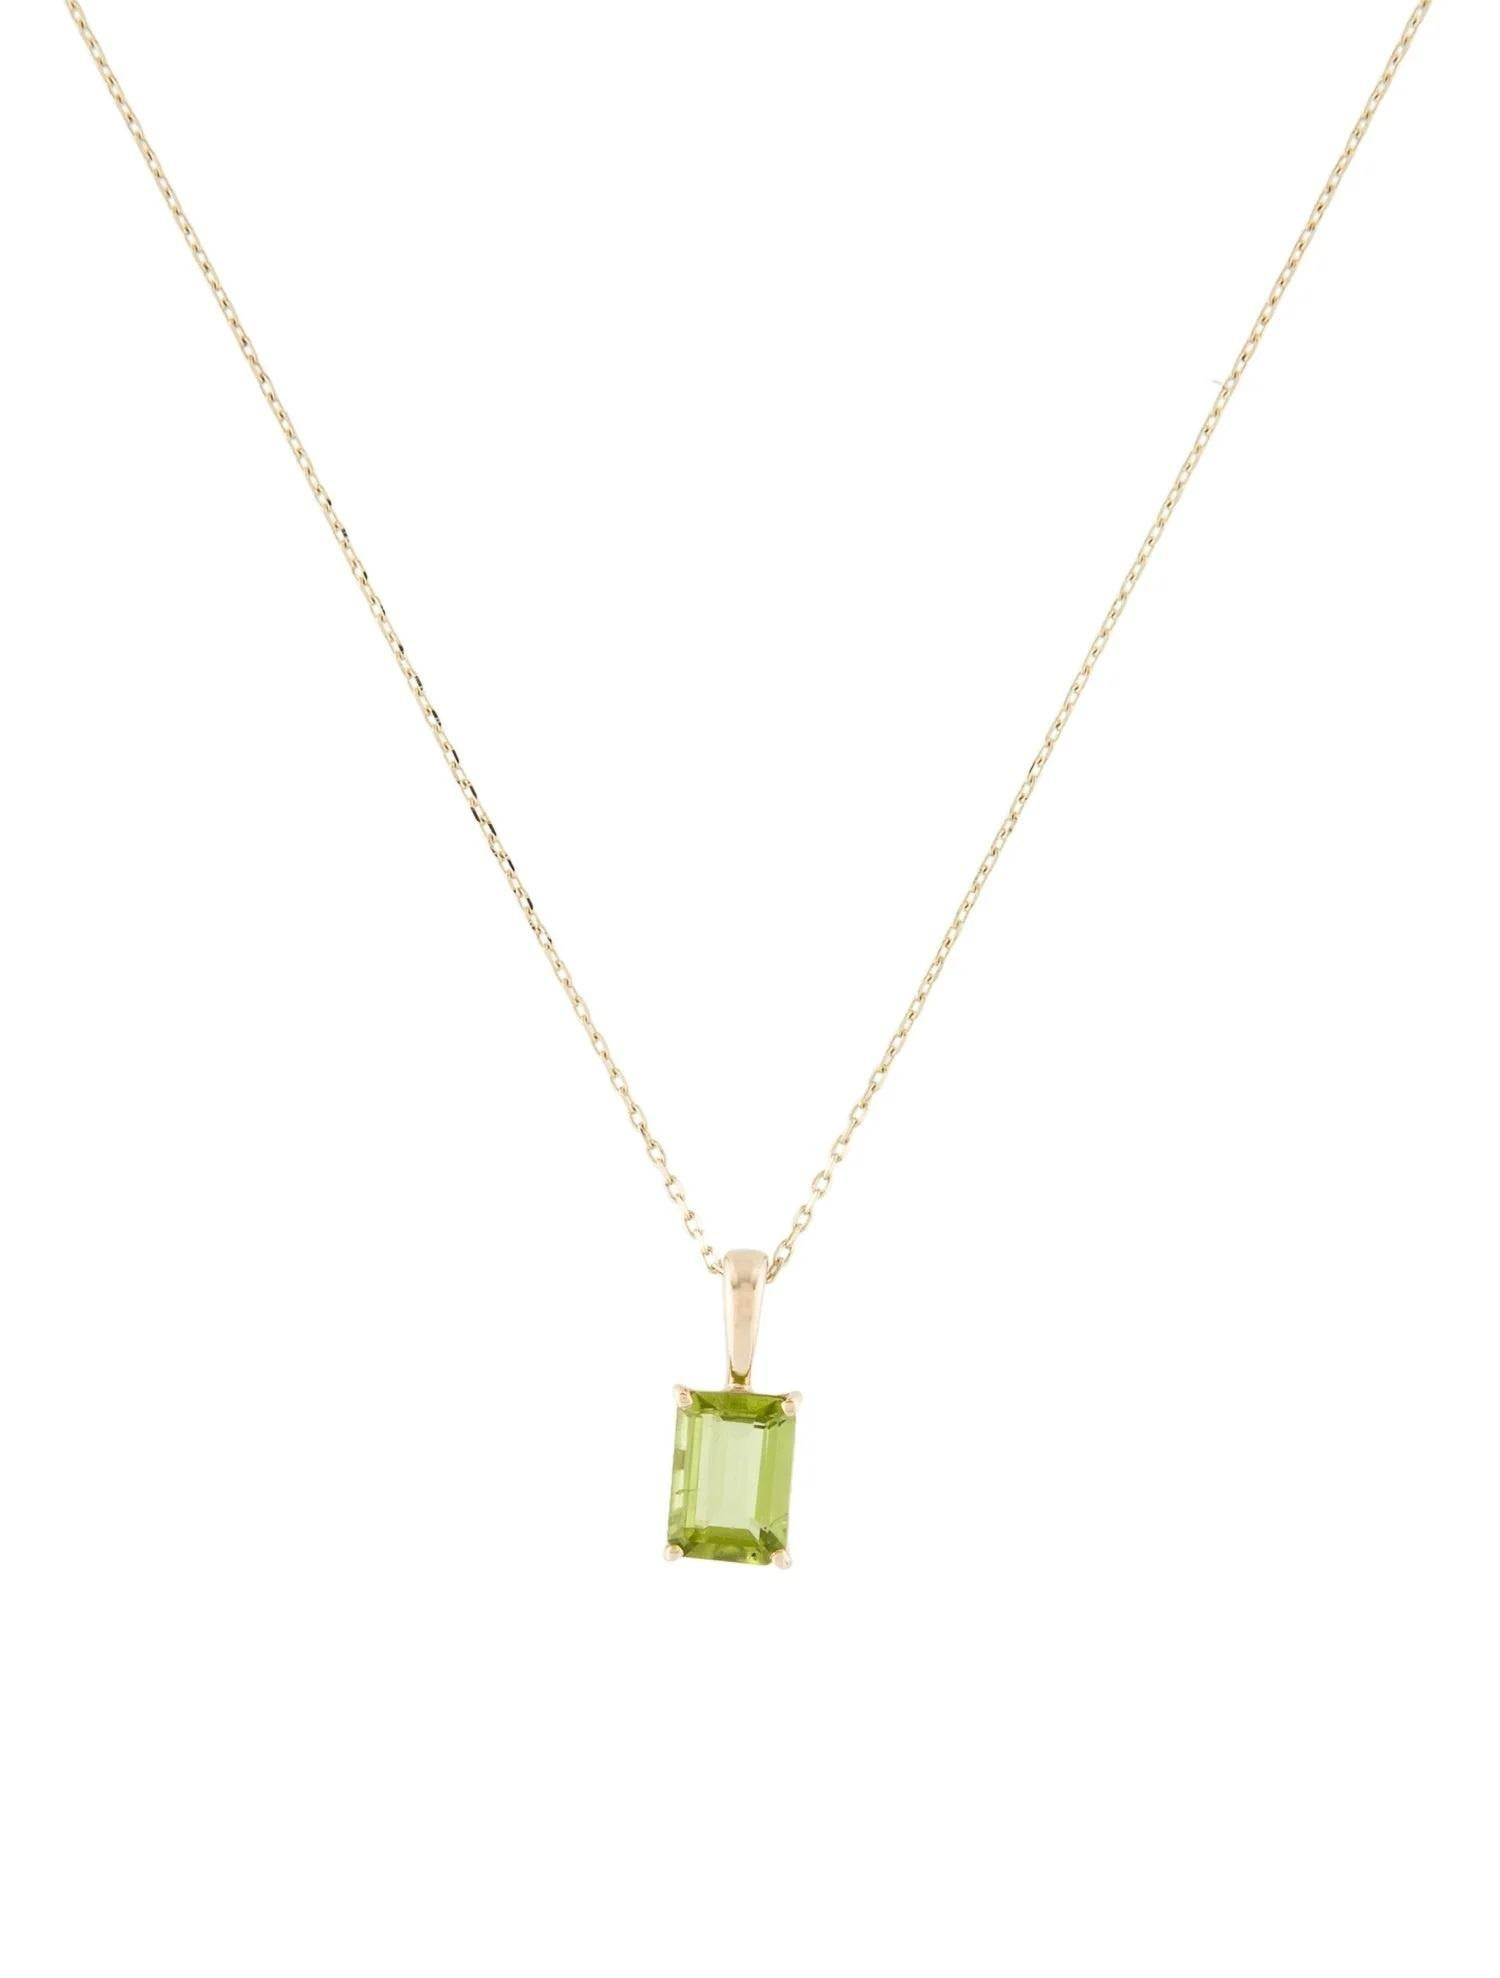 18K & 14K Yellow Gold Peridot Necklace, 0.87 Carat Emerald Cut In New Condition For Sale In Holtsville, NY